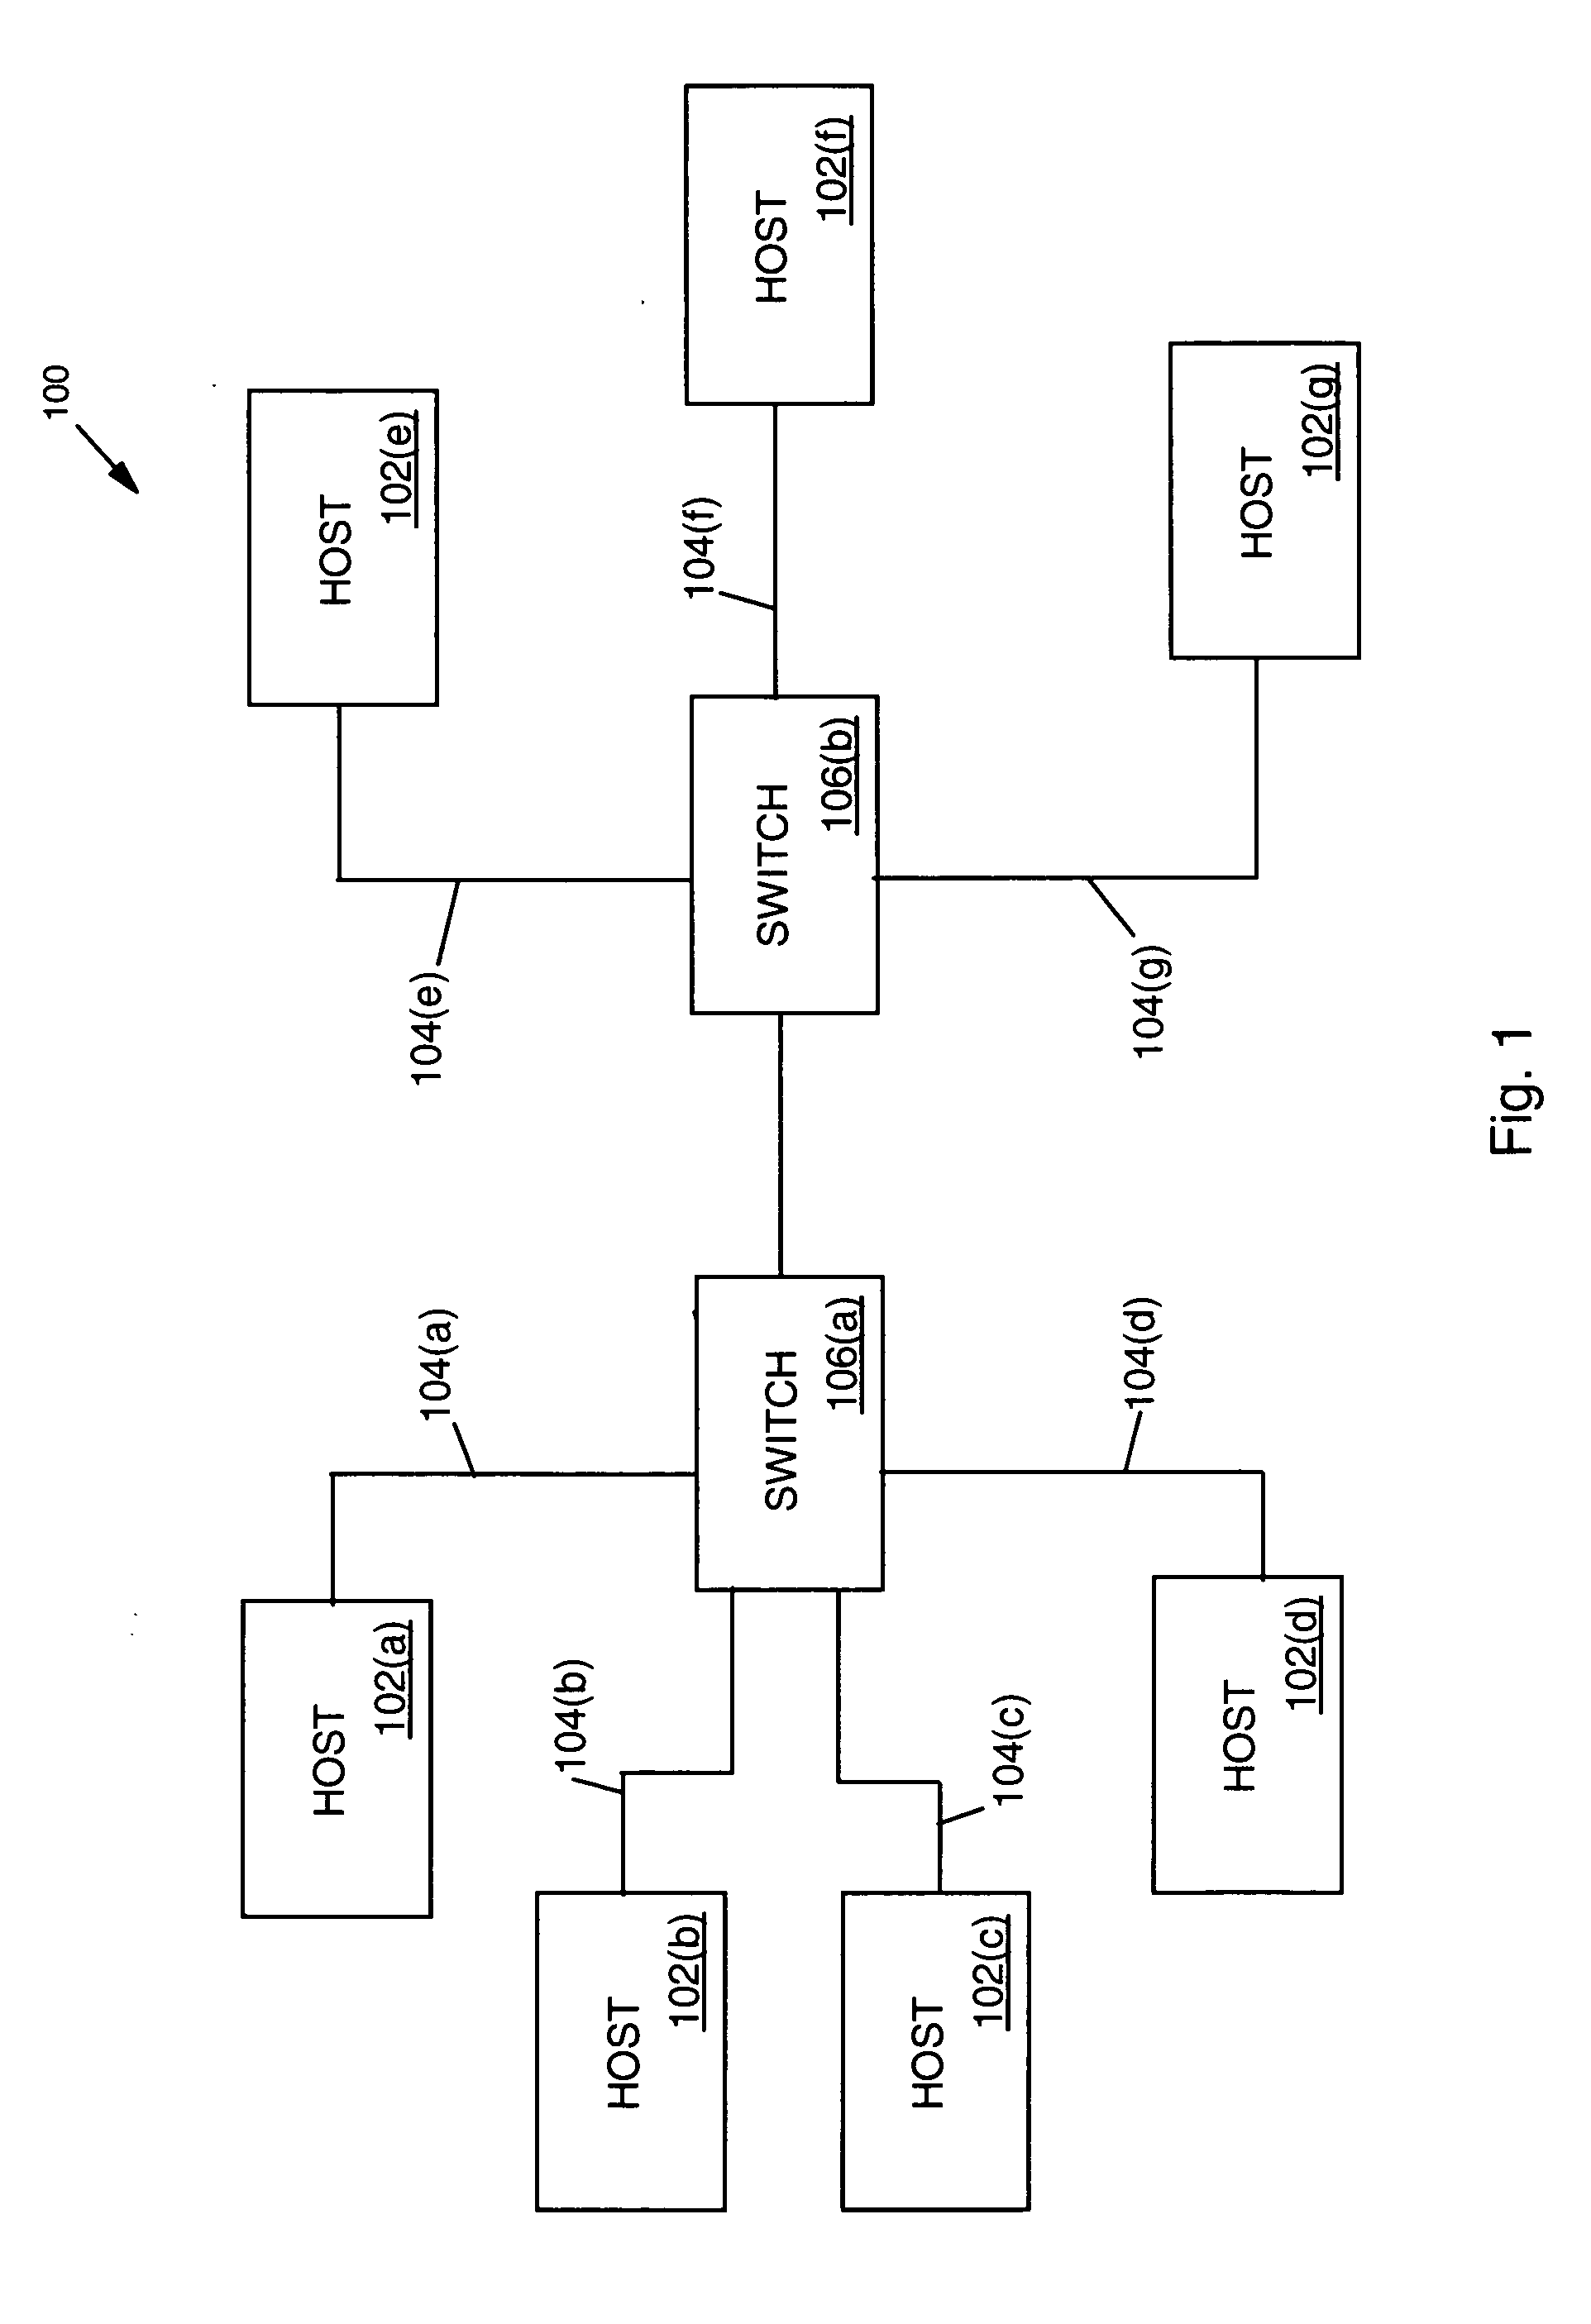 System and method for detecting errors in a network